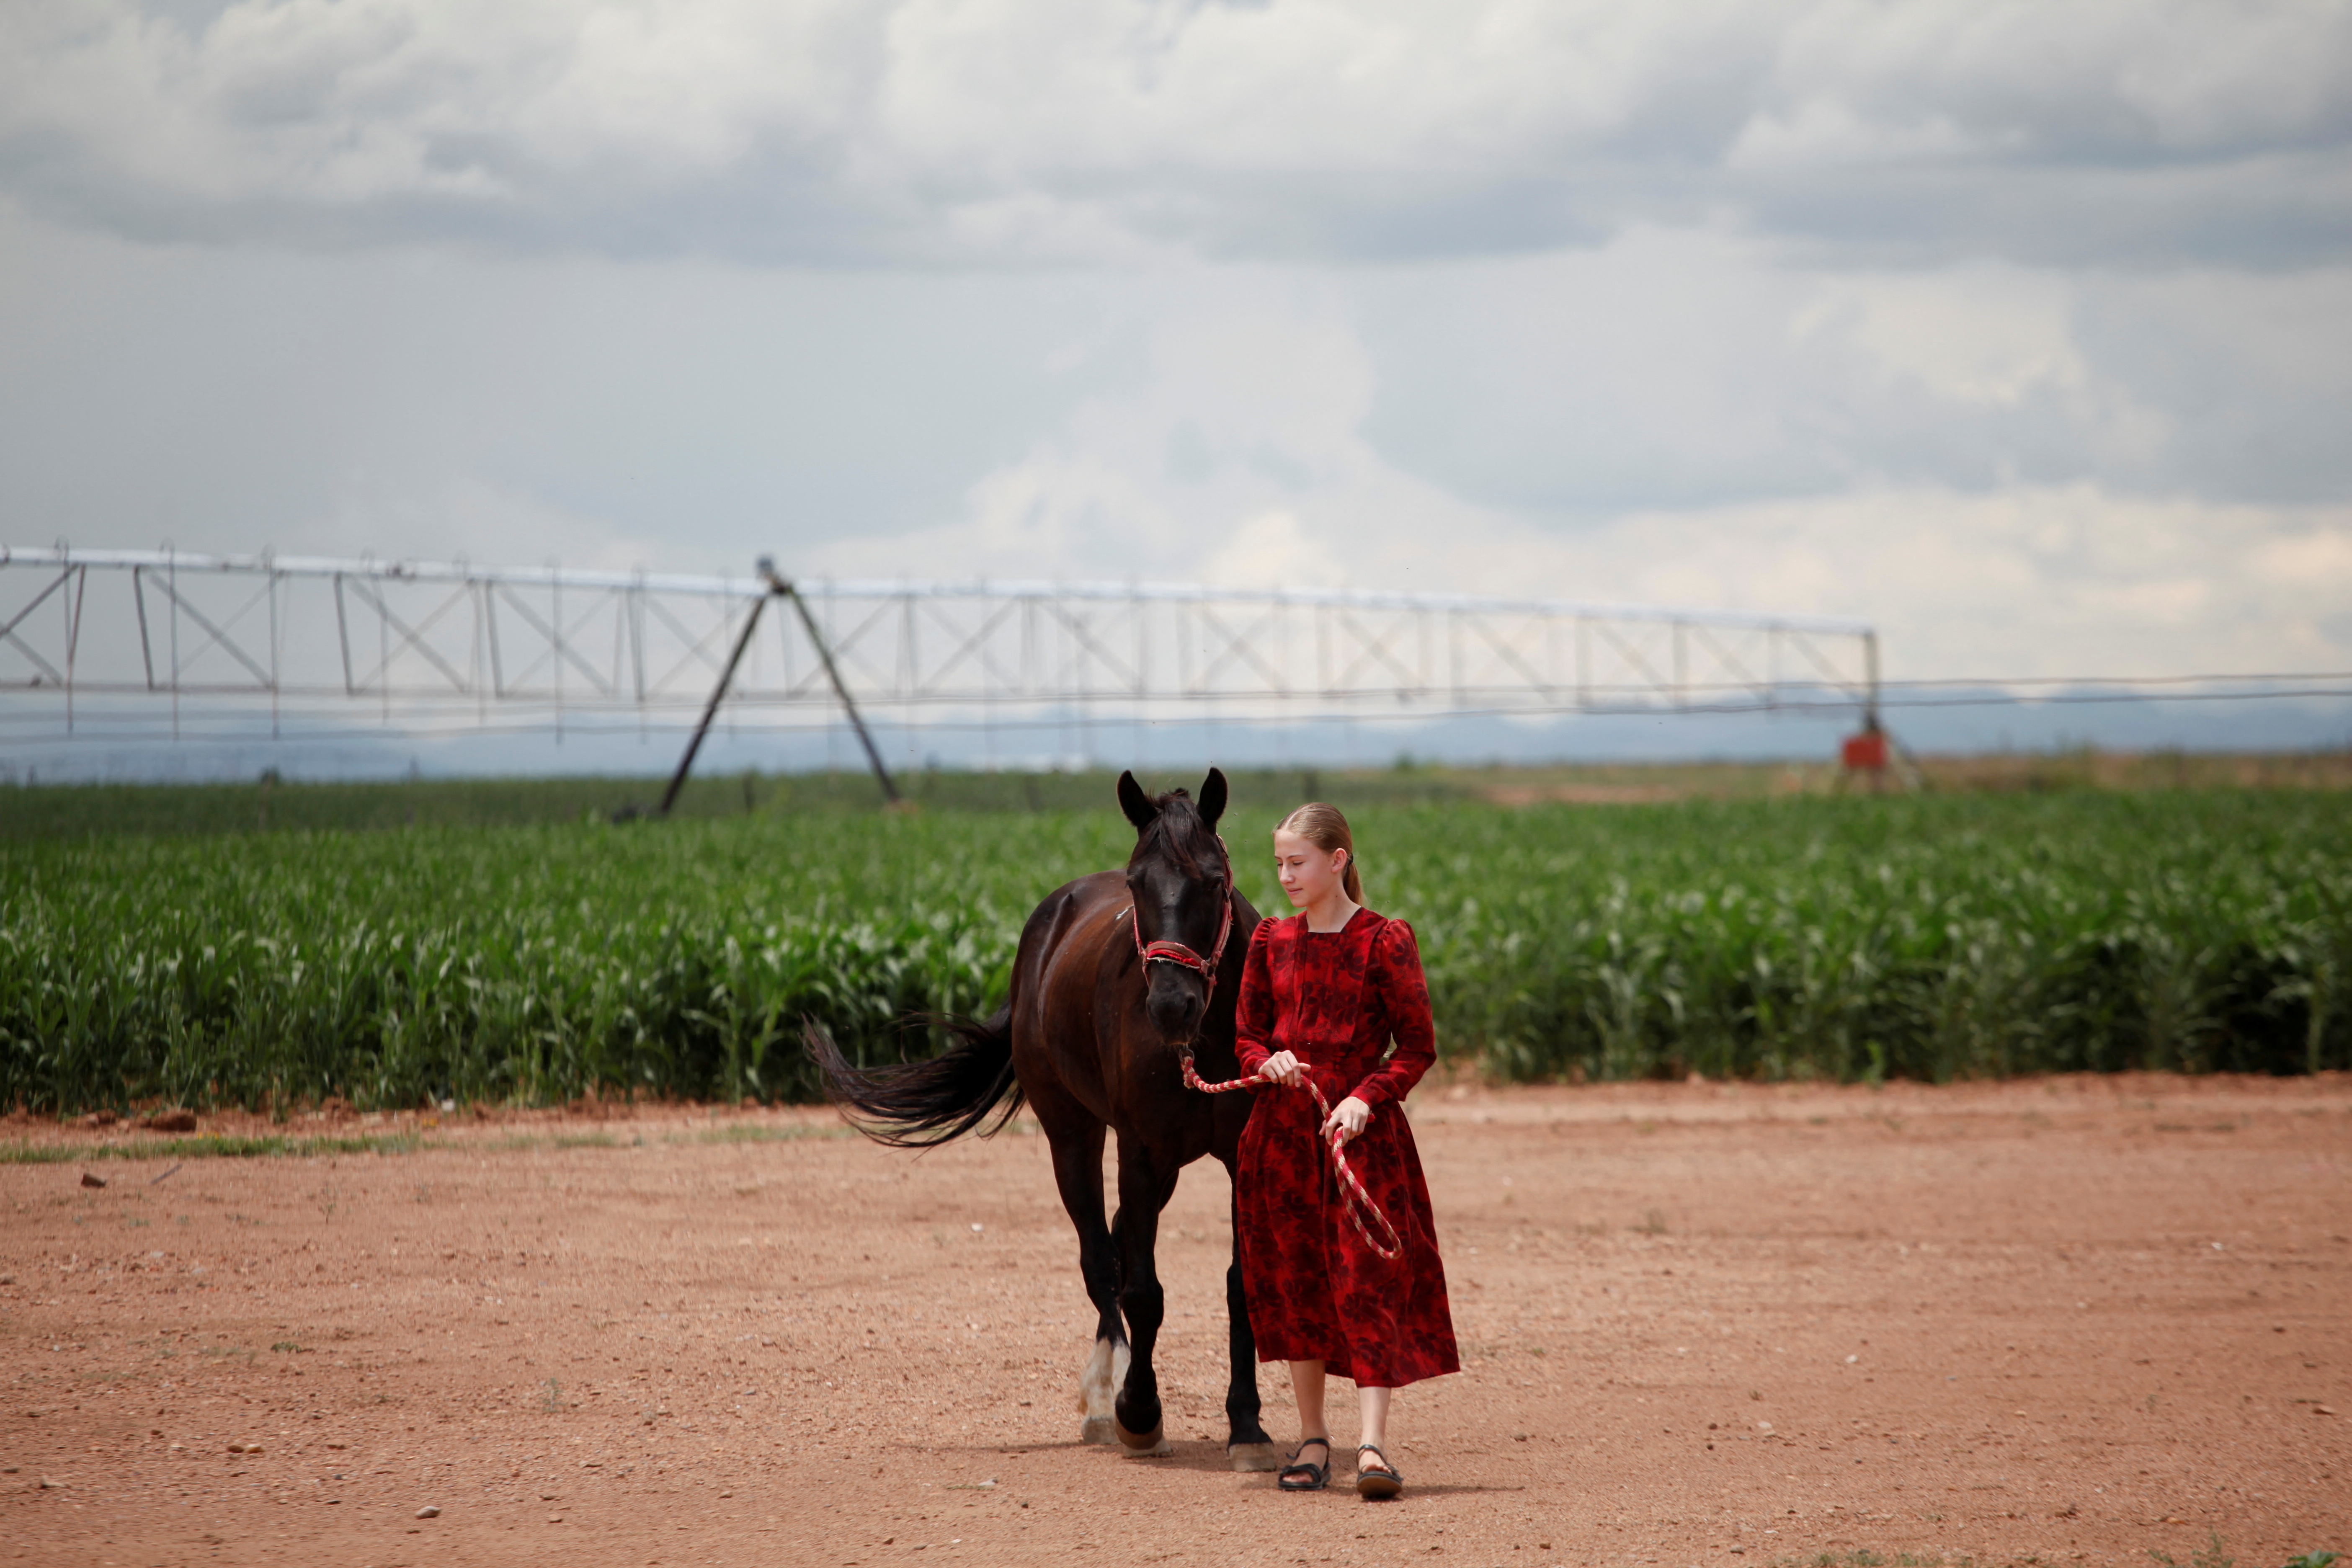 The Wider Image: In Mexico, a decade of images shows Mennonites' traditions frozen in time